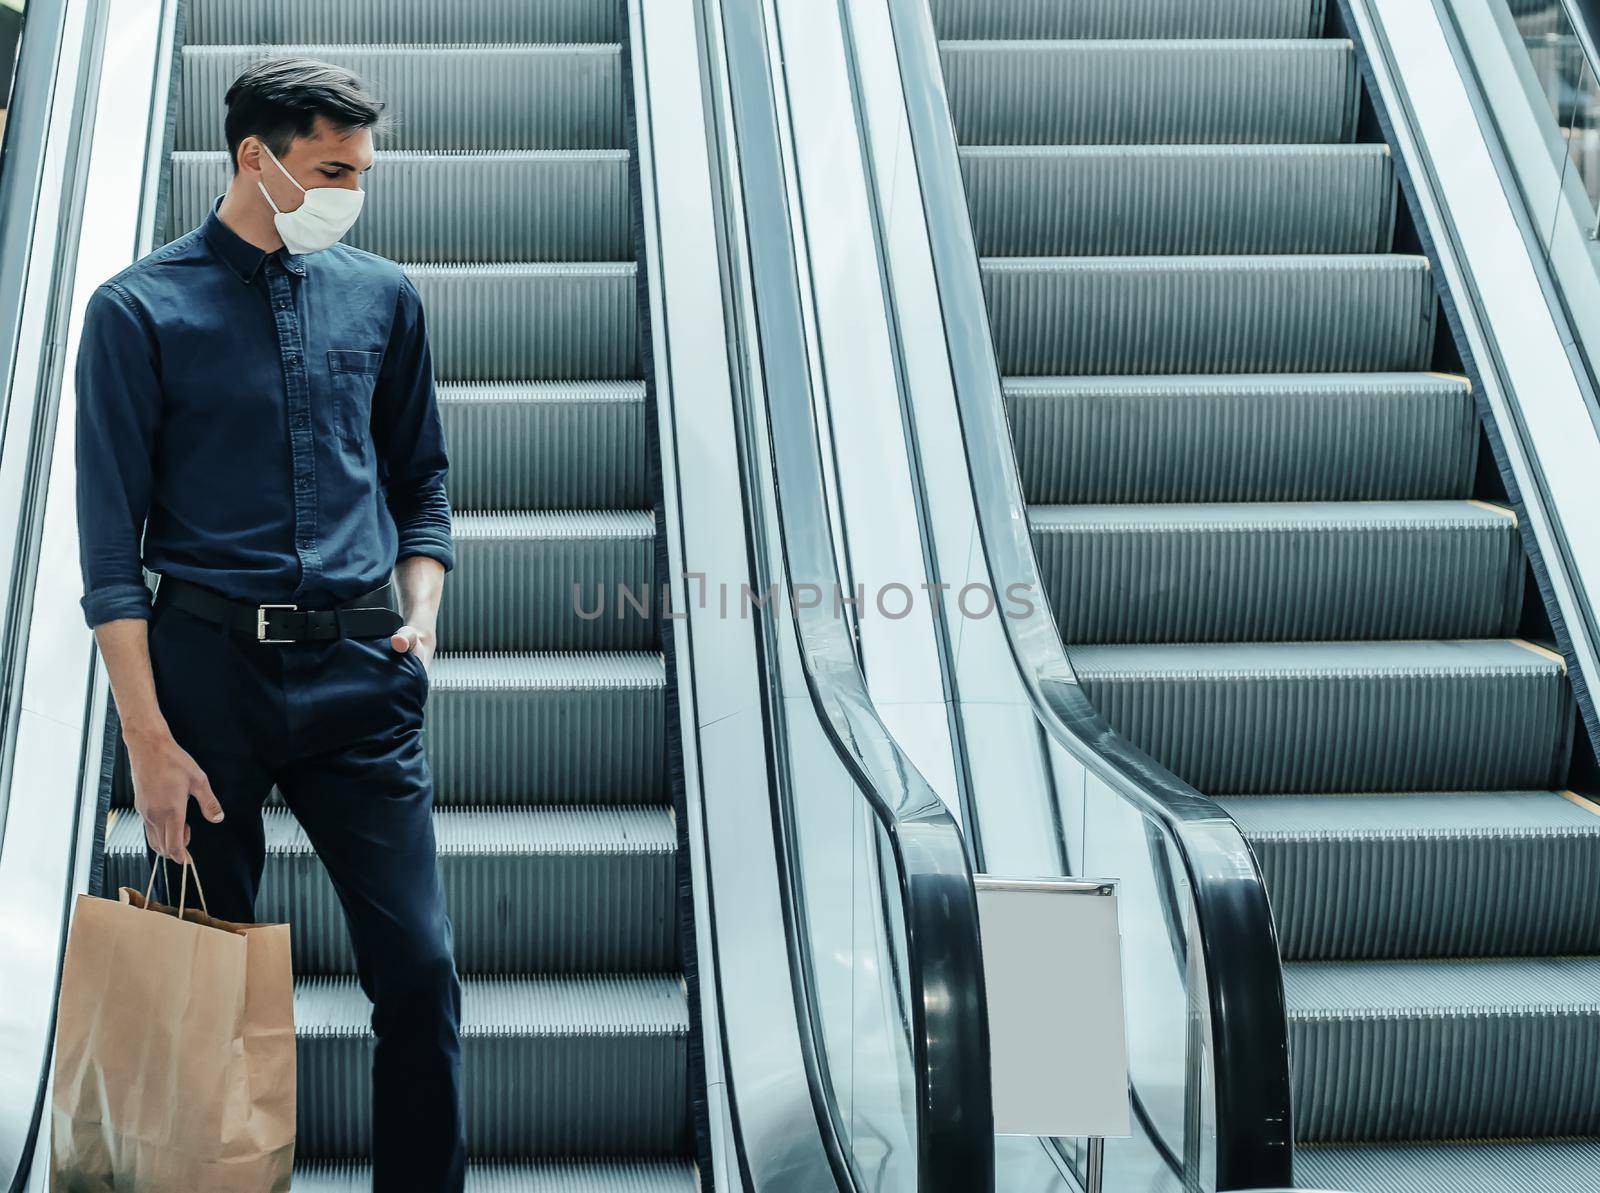 lone man in a protective mask standing on the escalator steps . photo with a copy-space